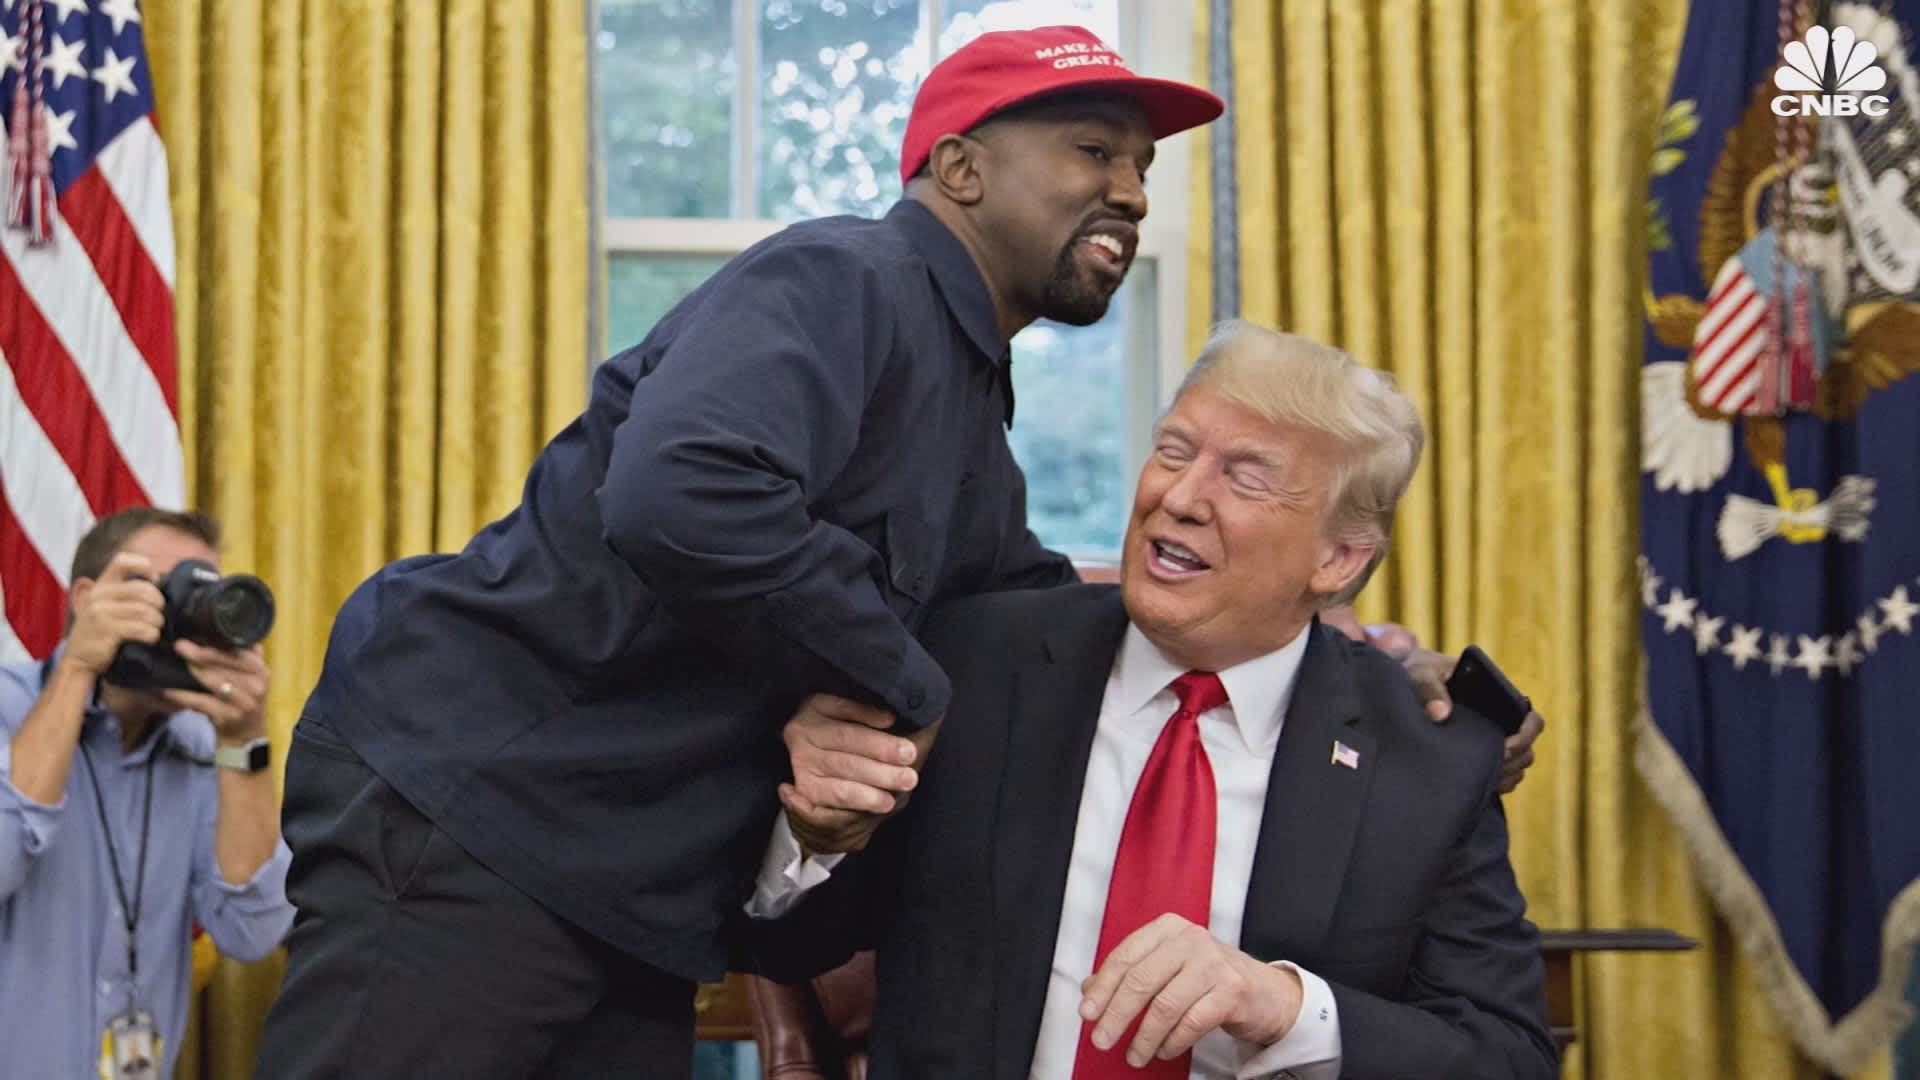 Kanye West goes on a wild, rambling Oval Office tirade